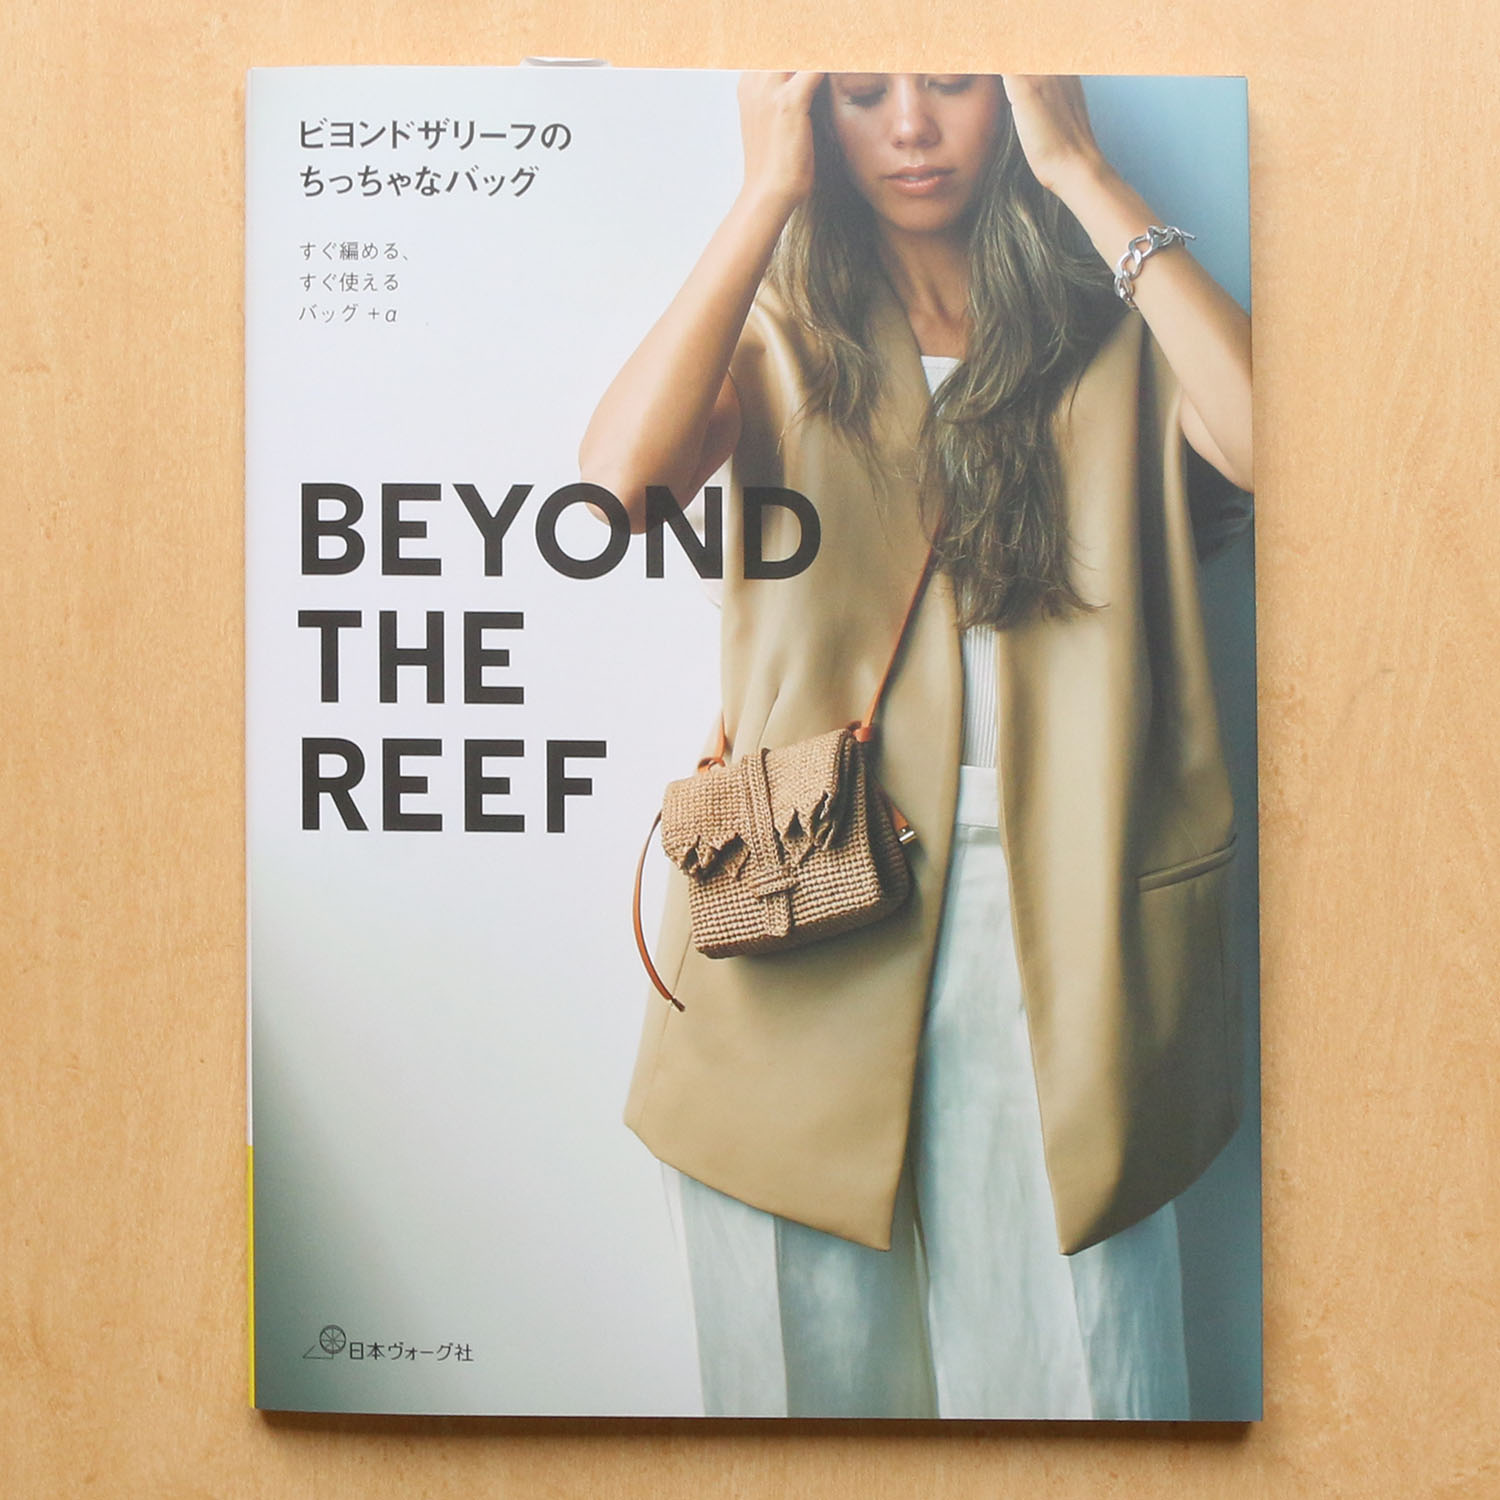 NV70690 BEYOND THE REEF (book)